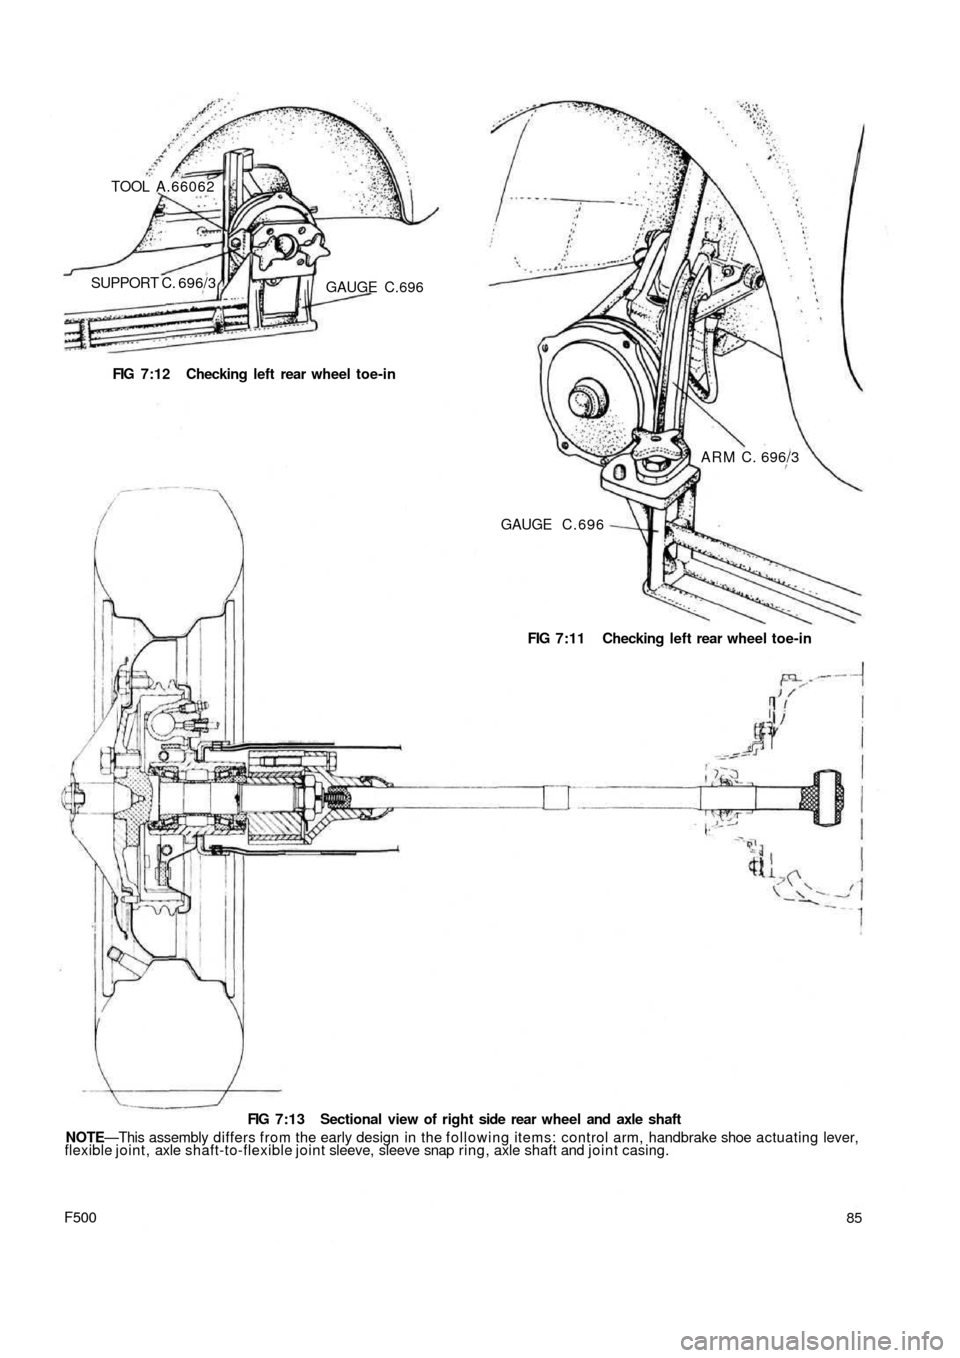 FIAT 500 1958 1.G Workshop Manual TOOL A.66062
SUPPORT C. 696/3GAUGE C.696
FIG 7:12 Checking left rear wheel toe-in
ARM C. 696/3
GAUGE C . 6 9 6
FIG 7:11 Checking left rear wheel toe-in
F500
FIG 7:13 Sectional view of right side rear 